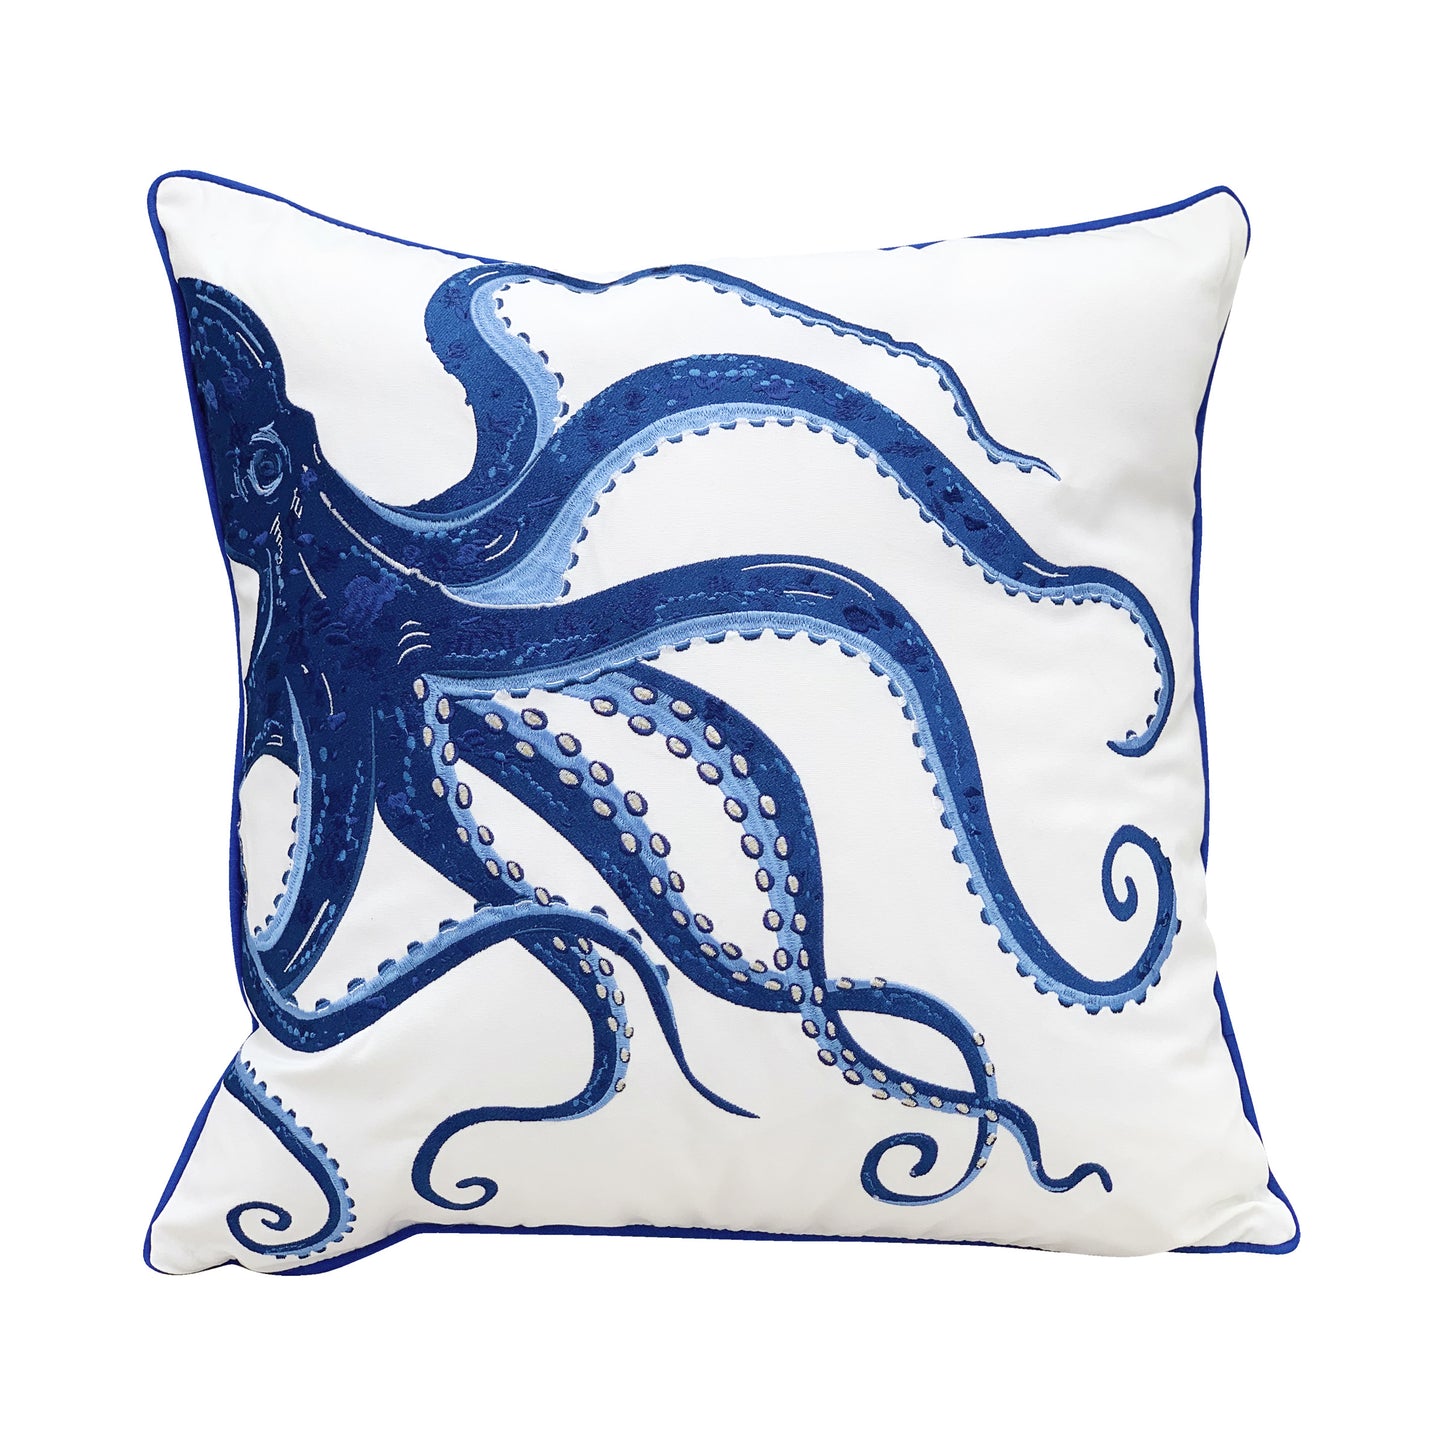 Embroidered blue octopus on a white ground outdoor pillow with blue piped edging.